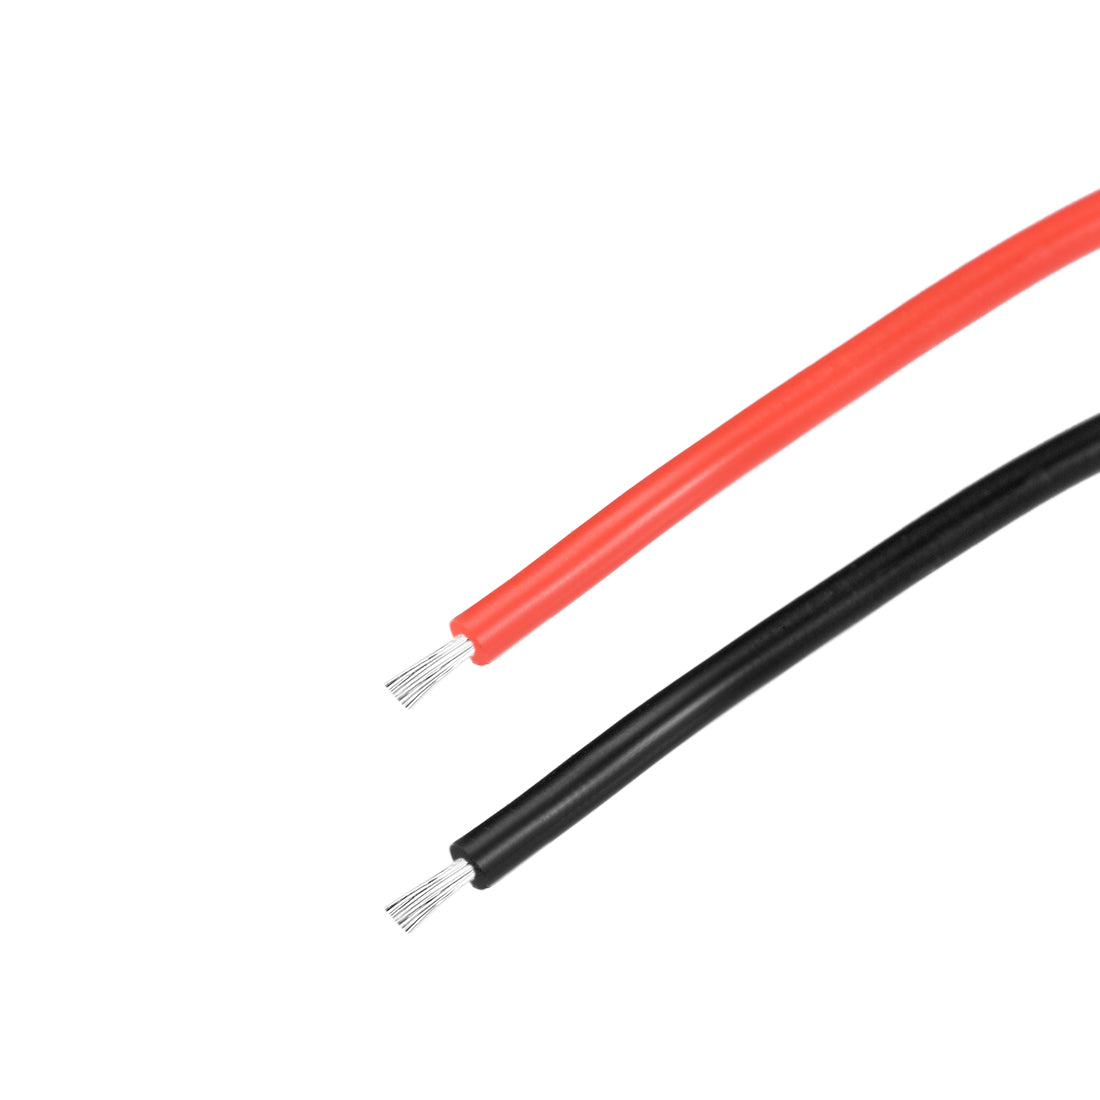 uxcell Uxcell Silicone Wire 16 AWG Electric Wire Stranded Copper Wire 10 ft Black & Red